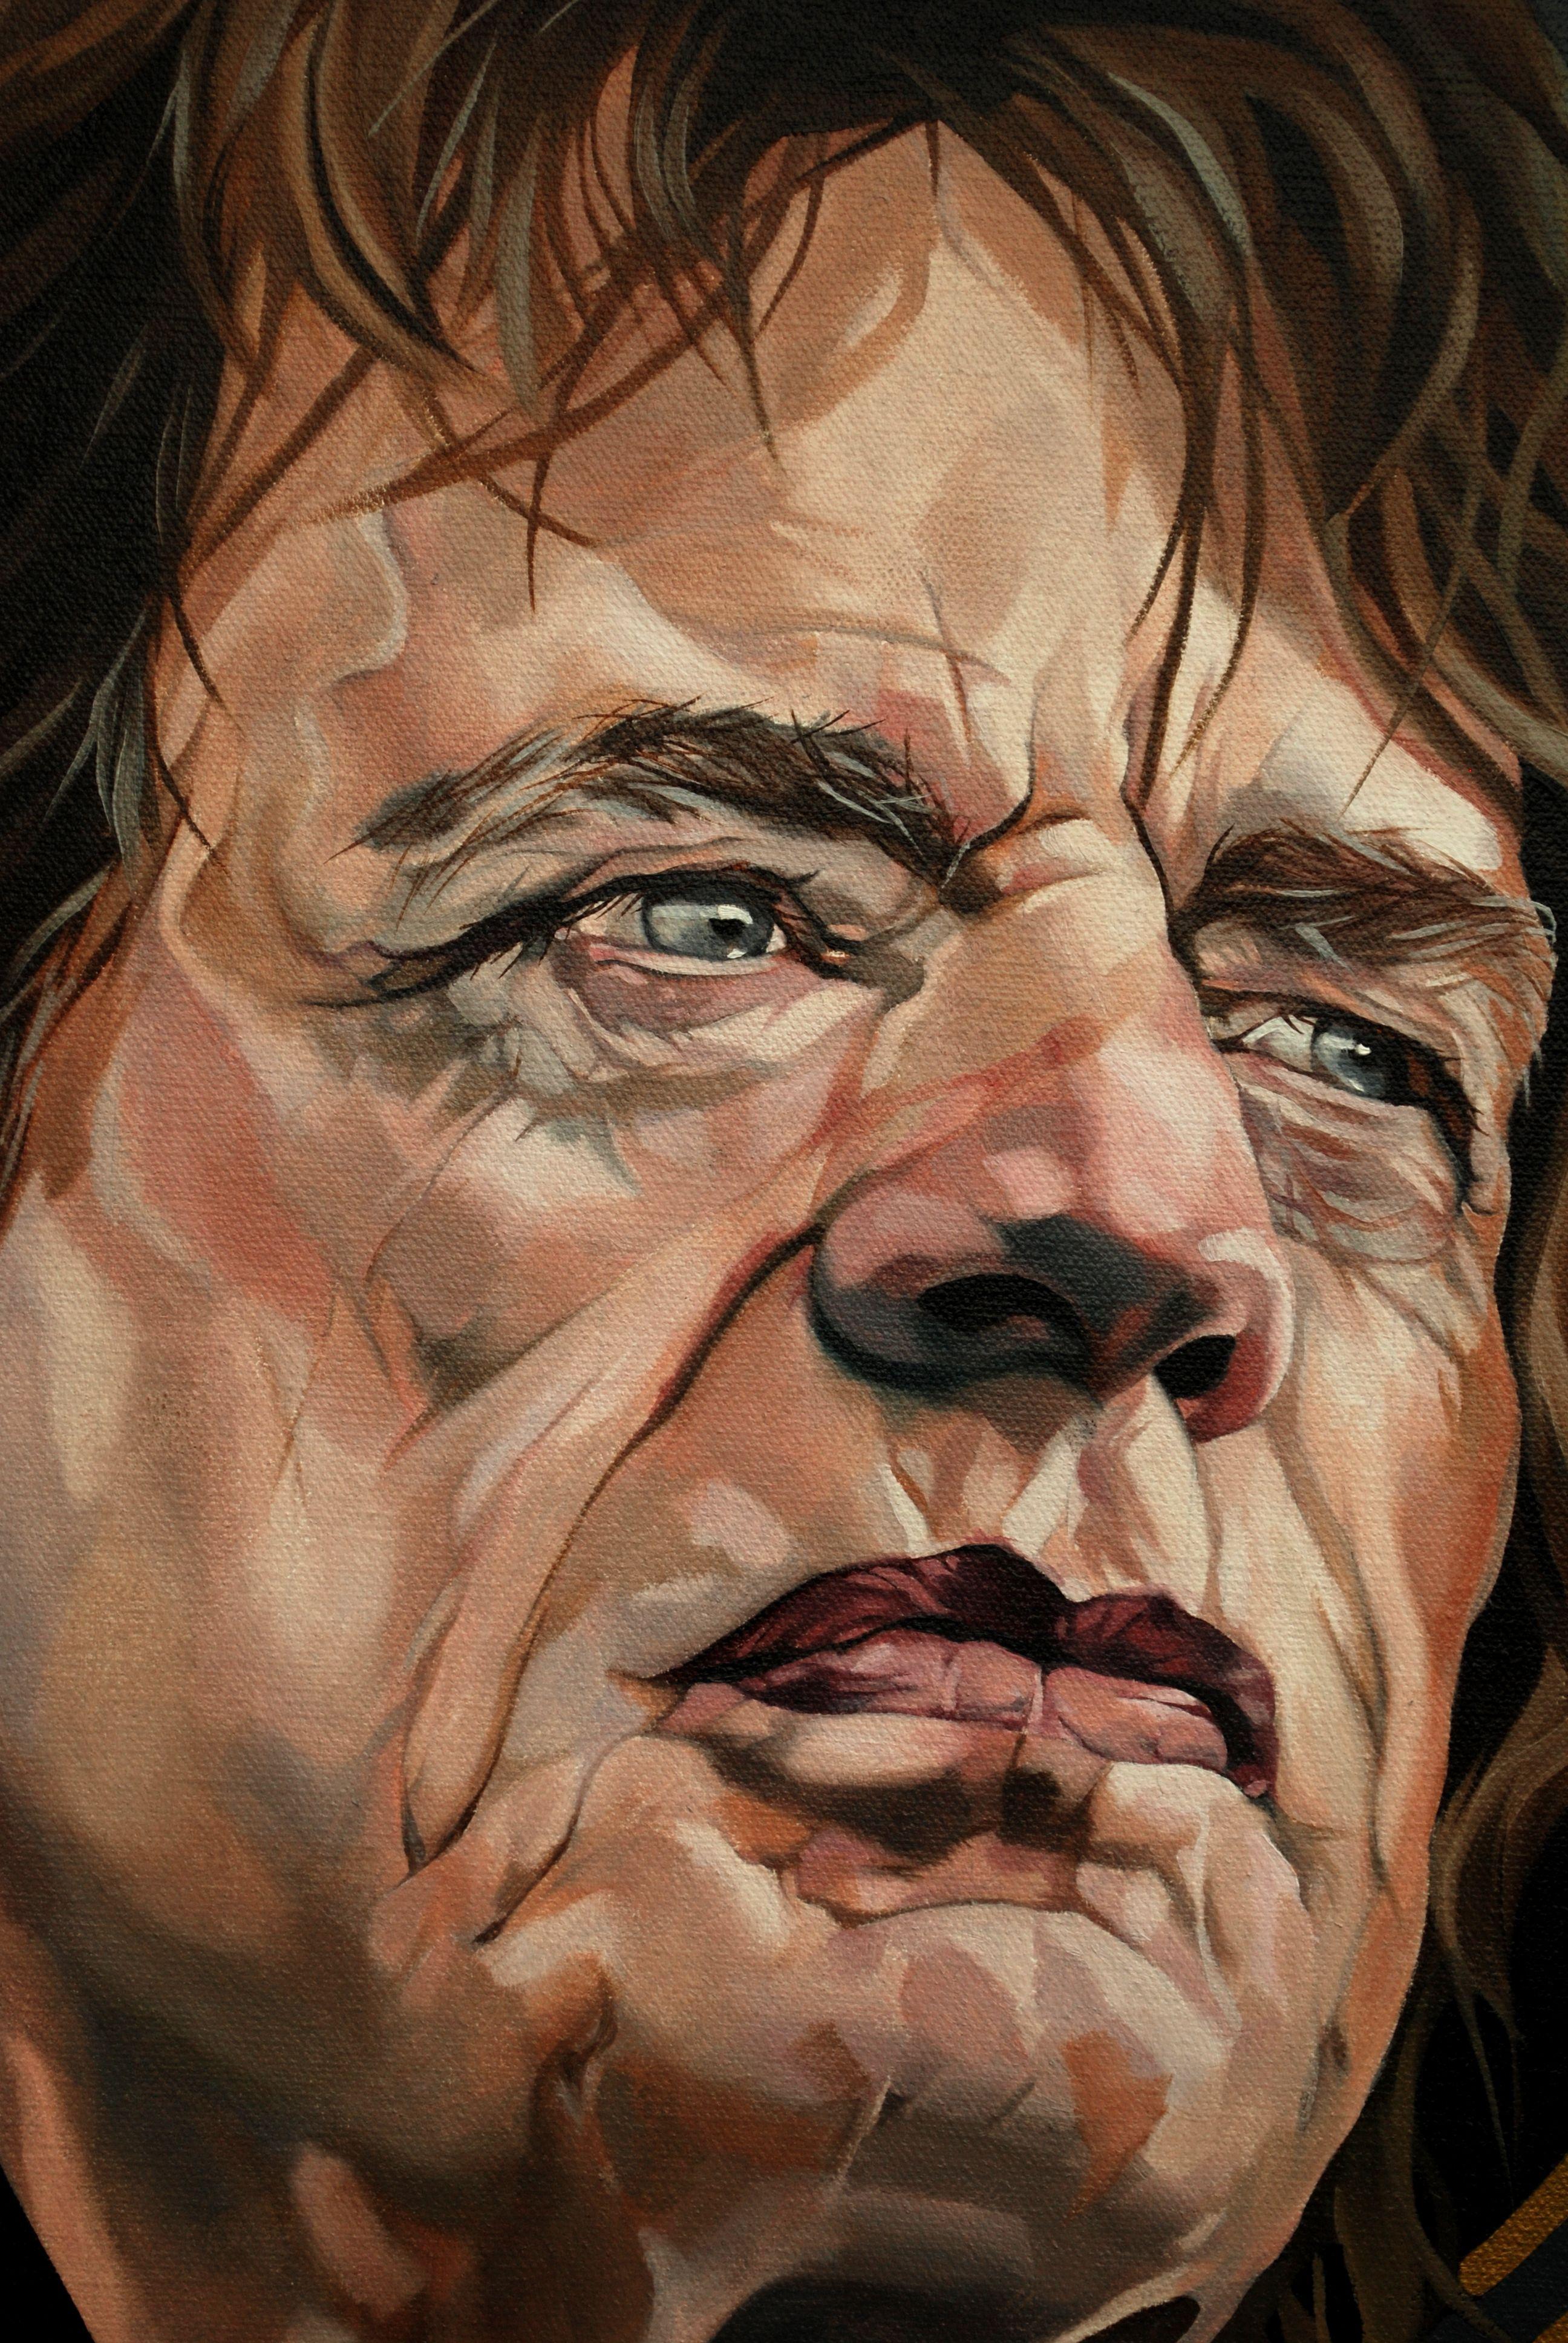 Portrait of Mick Jagger. Jagger looks fairly elegant I think, I wanted to paint him as he is now, more characterful with age. I love the Rolling Stones log, it's so iconic, so seemed to be the obvious choice for a contemporary background. I have